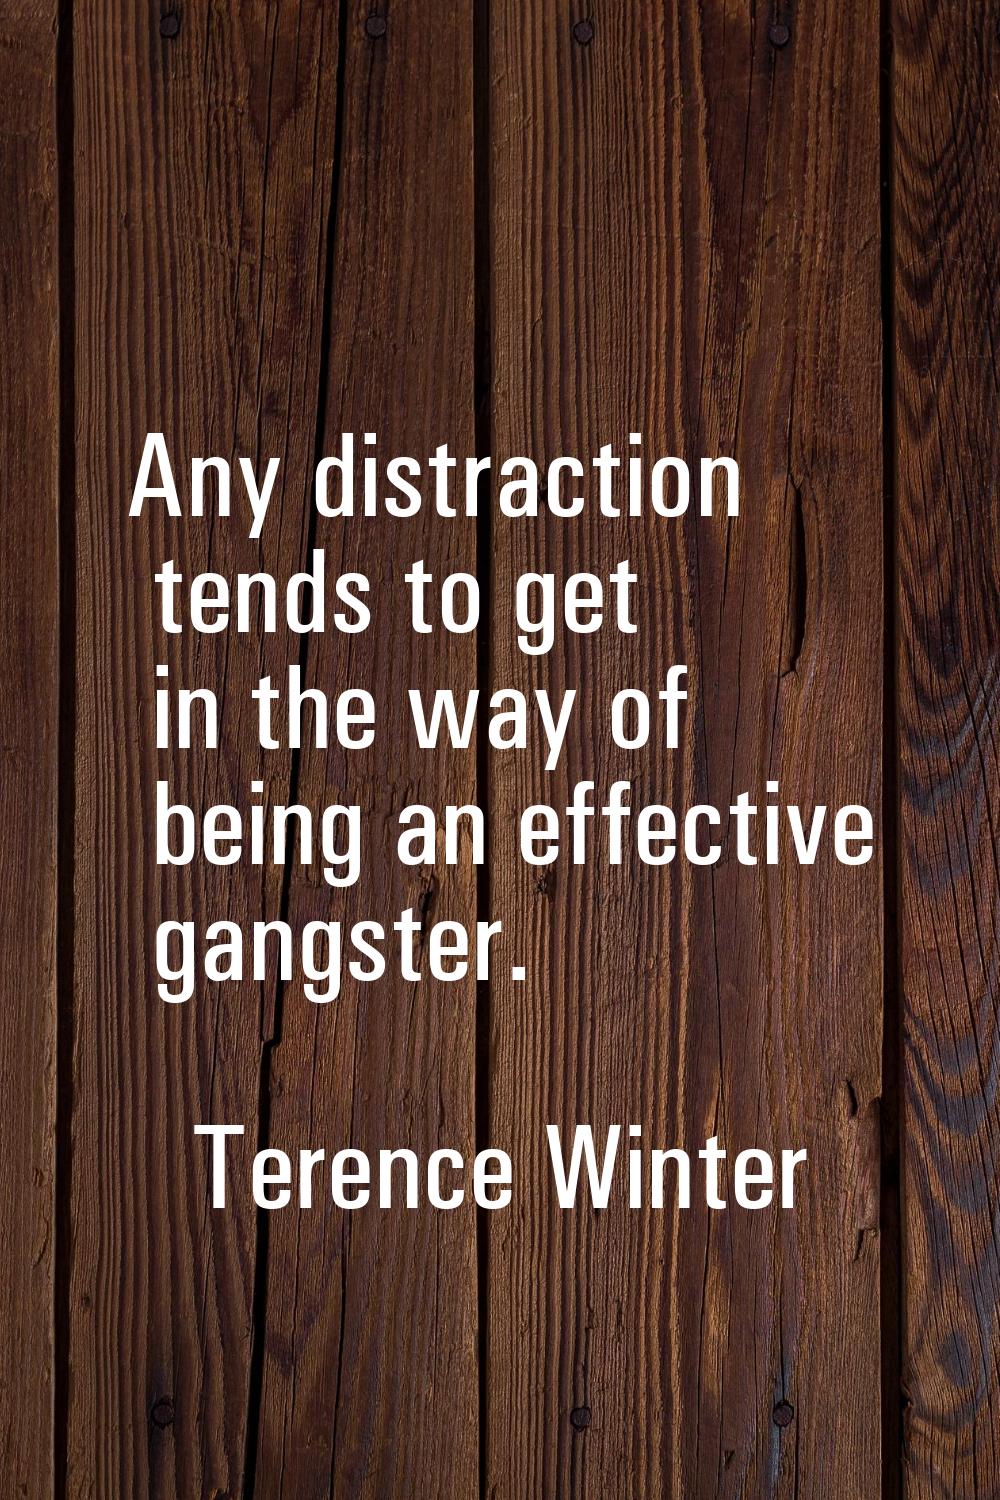 Any distraction tends to get in the way of being an effective gangster.